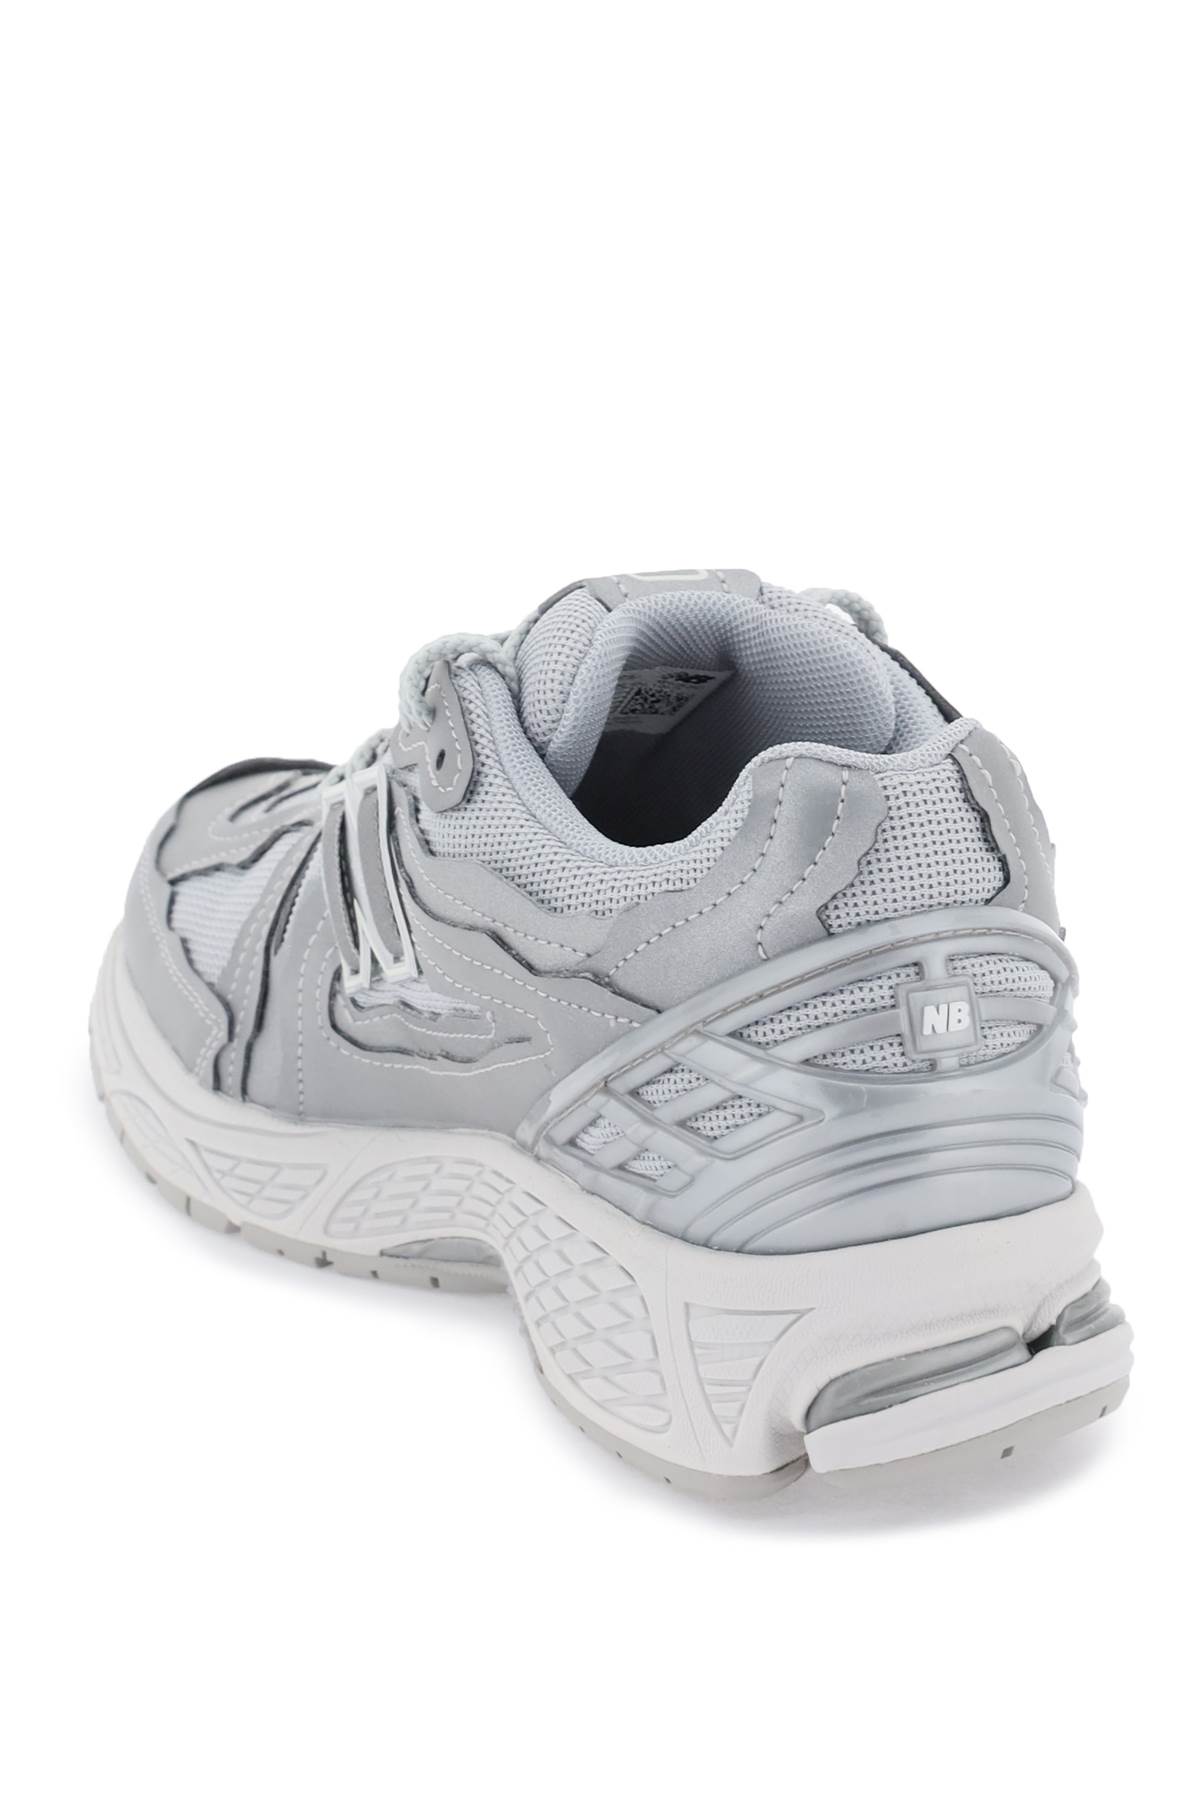 Shop New Balance 1906dh Sneakers In Silver Metallic (silver)